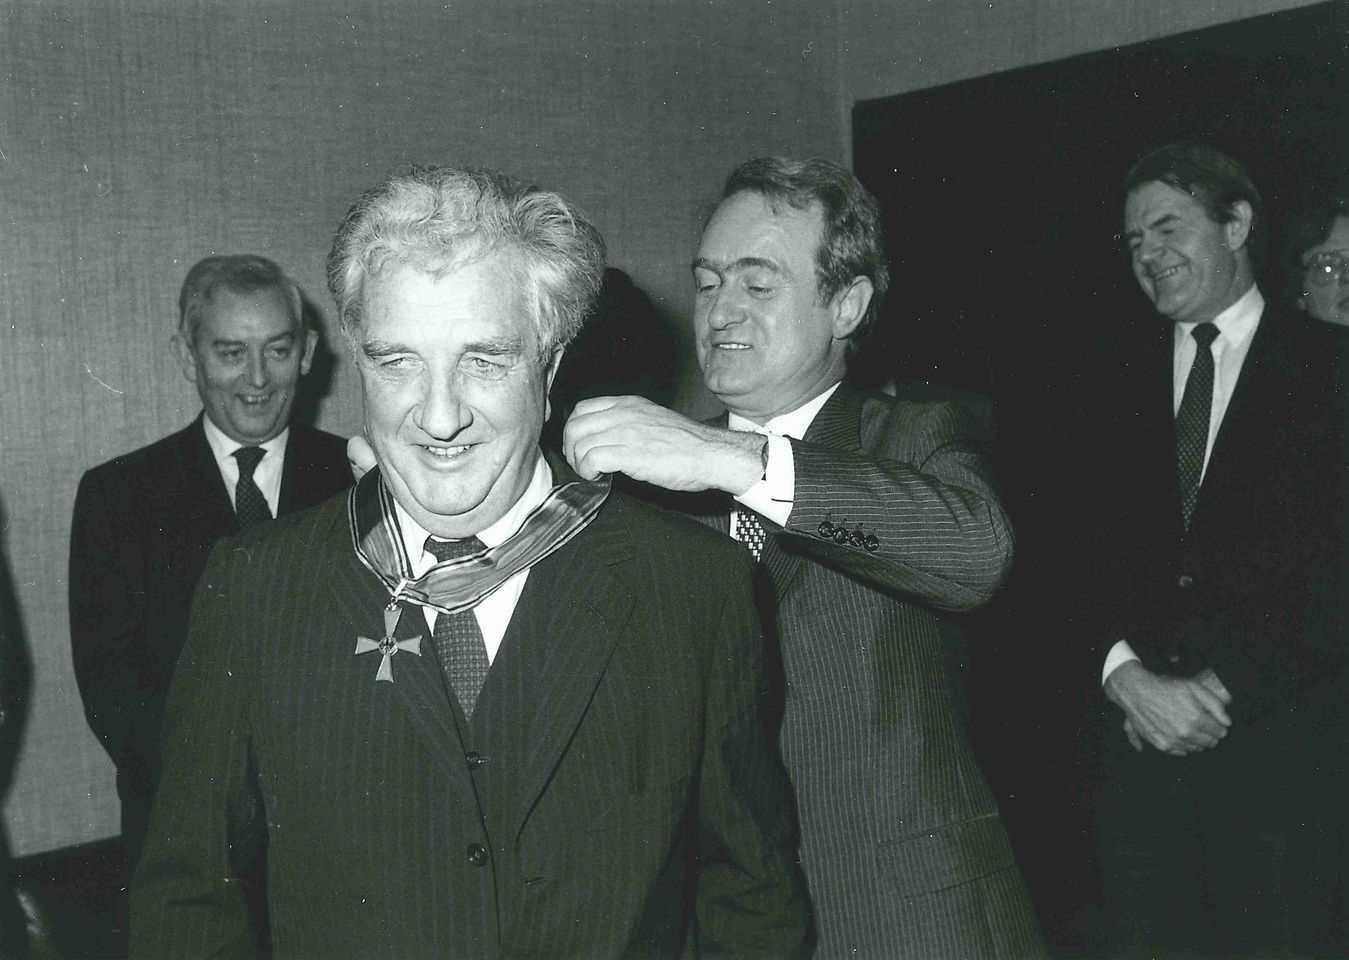 The Prime Minister of North Rhine-Westphalia, Johannes Rau, presented Dr. Konrad Henkel with the Commander's Cross of the Order of Merit of the Federal Republic of Germany in 1980.